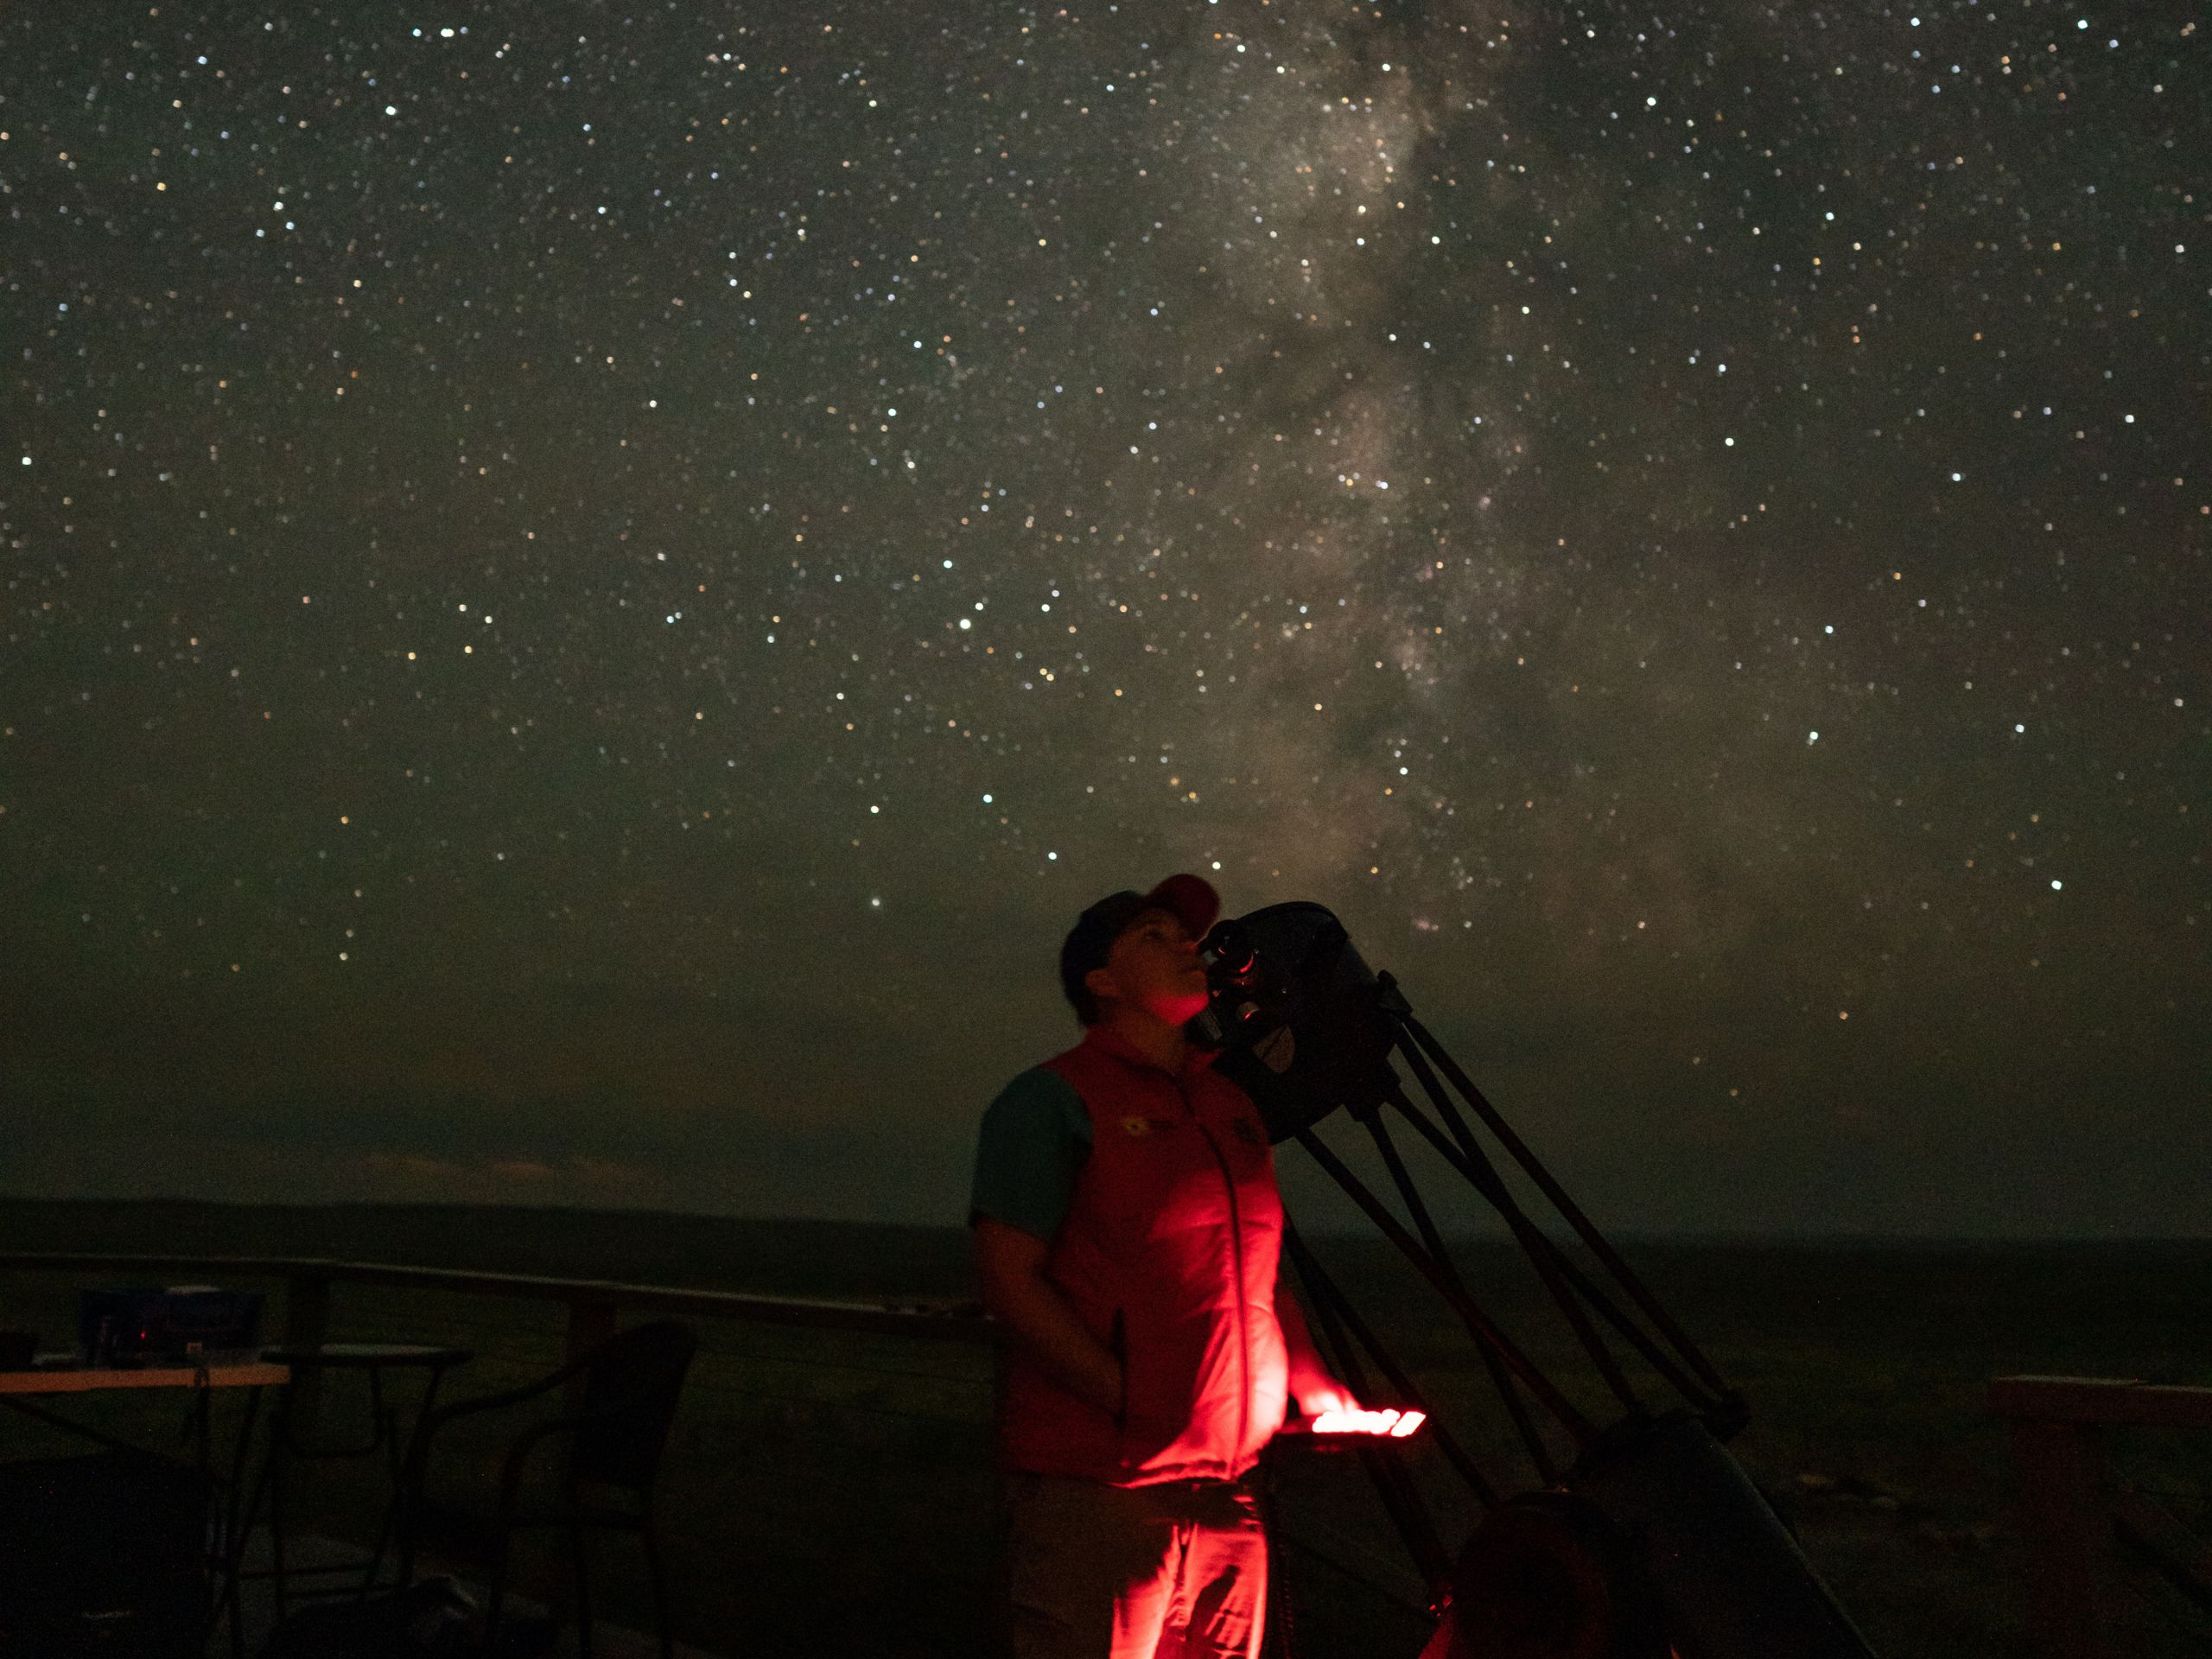 Starry sky on dark night with young person in red sweatshirt looking through a large telescope.